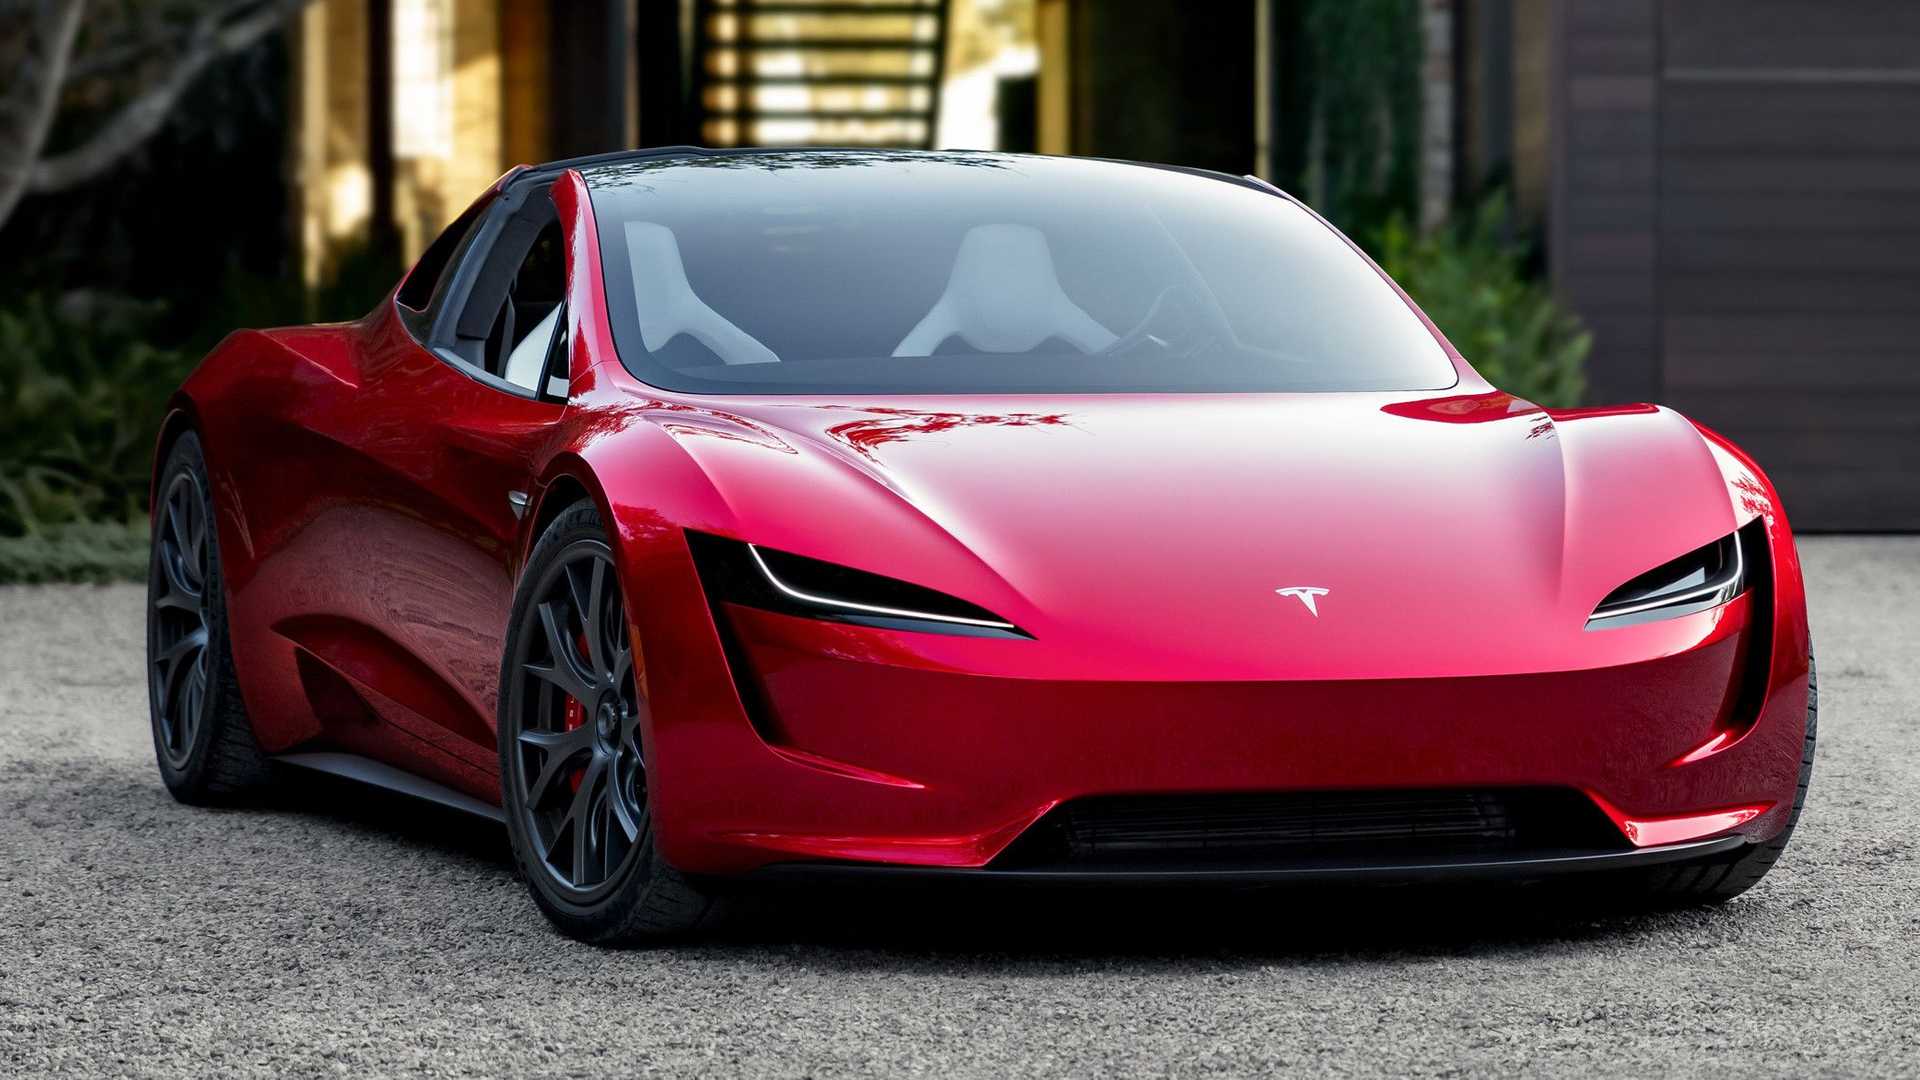 Tesla CEO Elon Musk says the upcoming Tesla Roadster ‘should ship’ in 2023